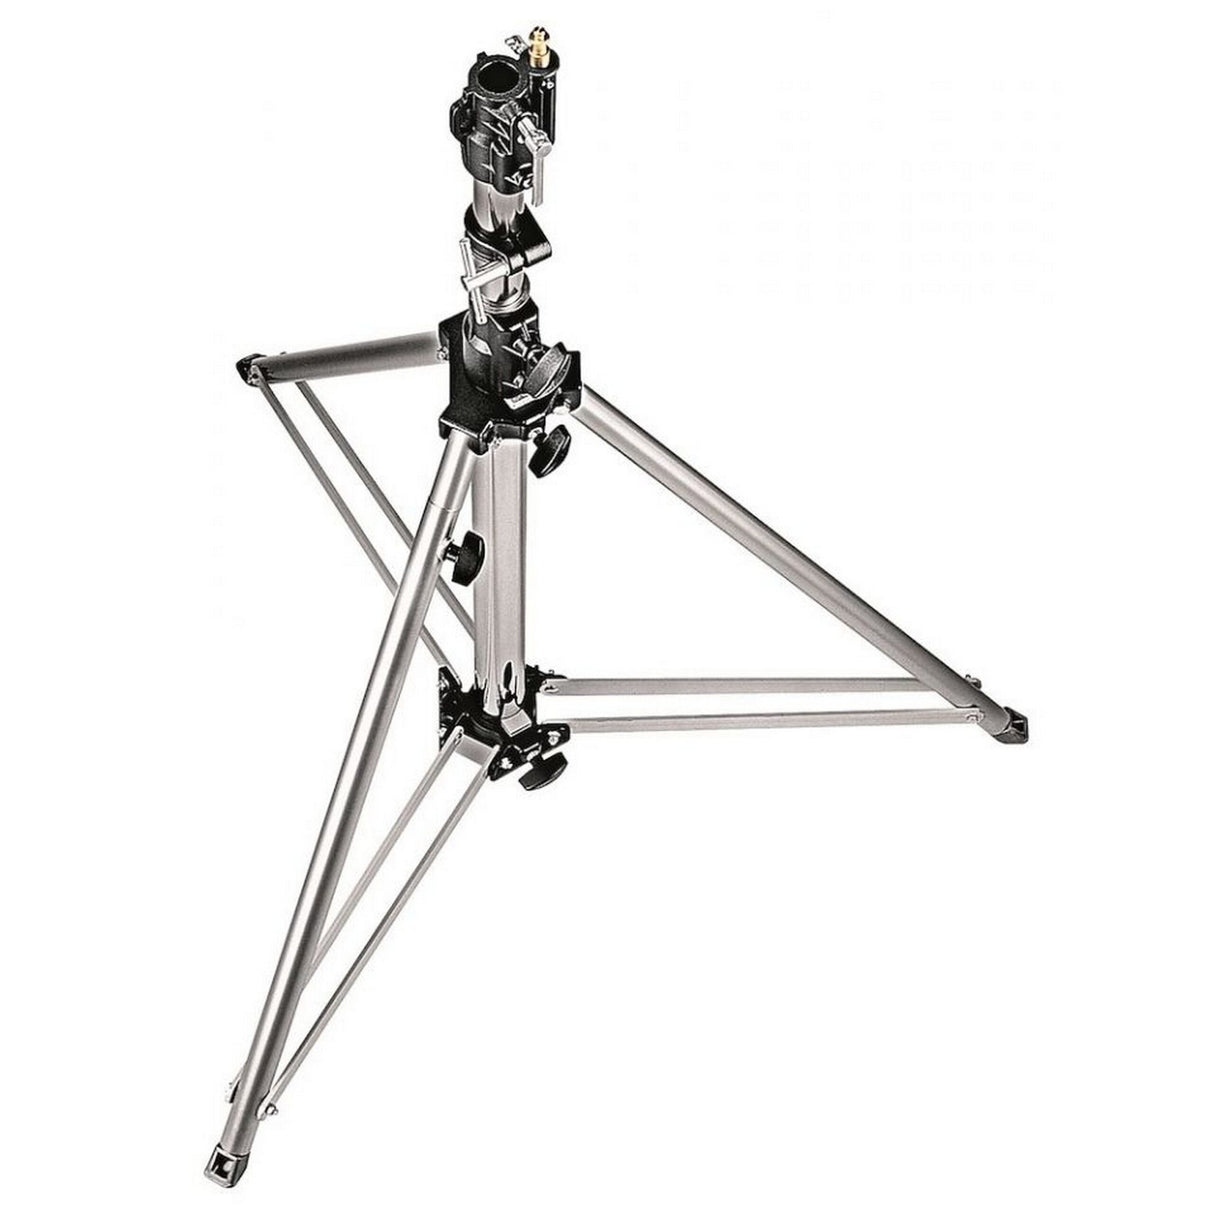 Manfrotto 070CSU High Payload Follow Spot Stand with Leveling Leg